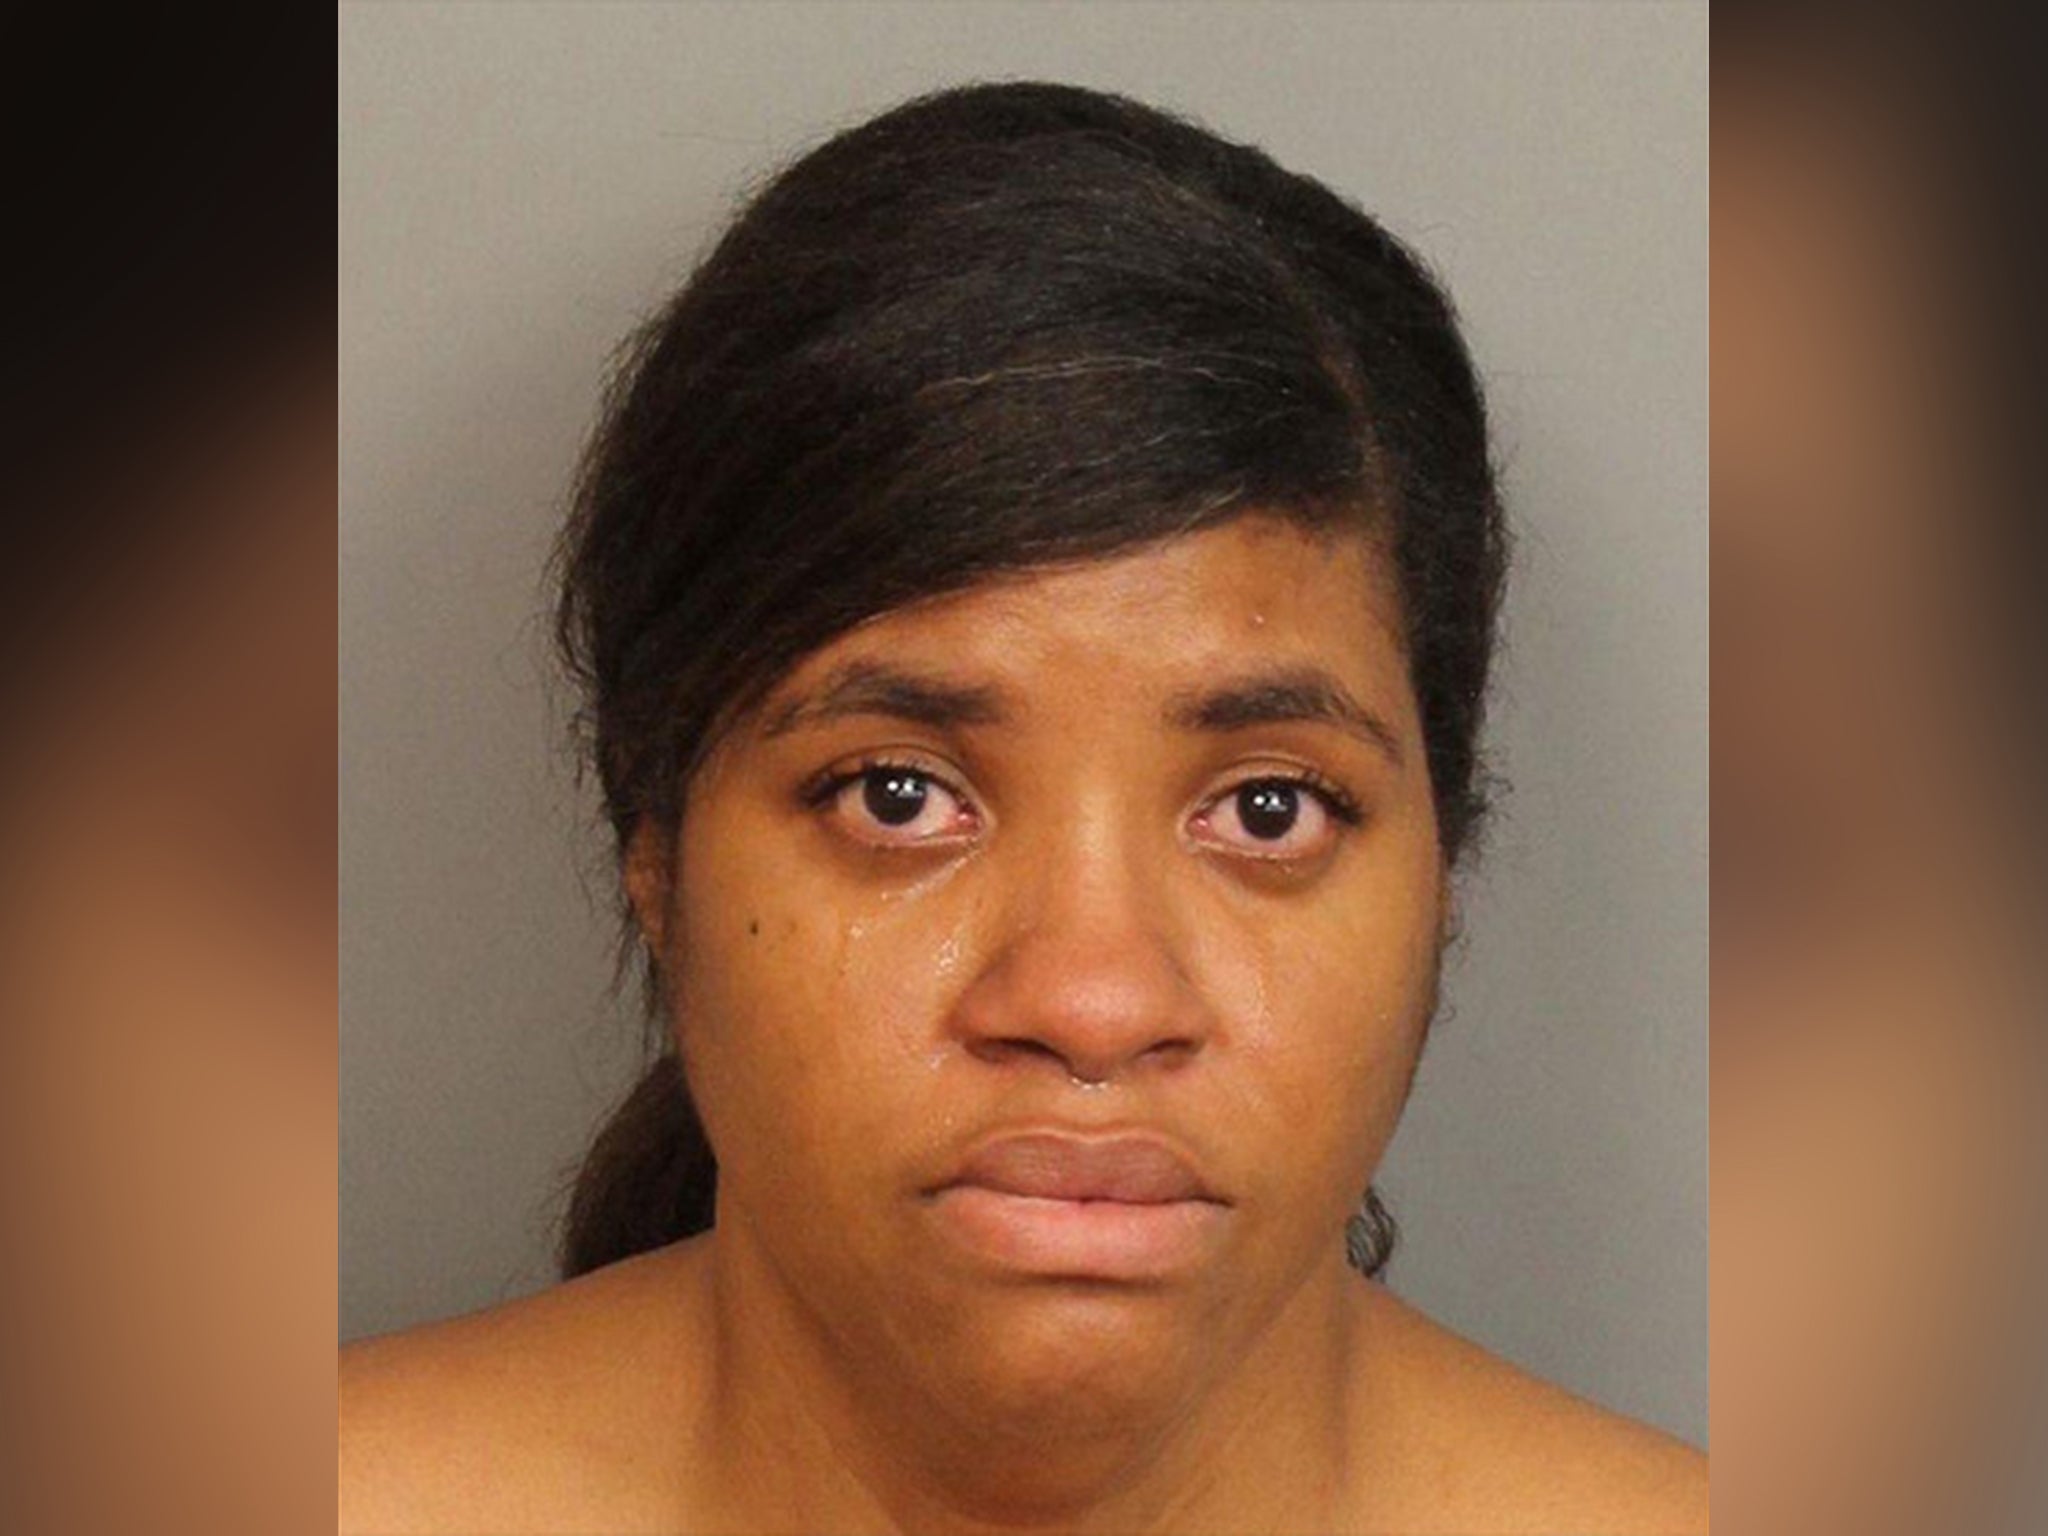 A woman was arrested in Alabama after getting into an “altercation” with a 11-year-old, say local police